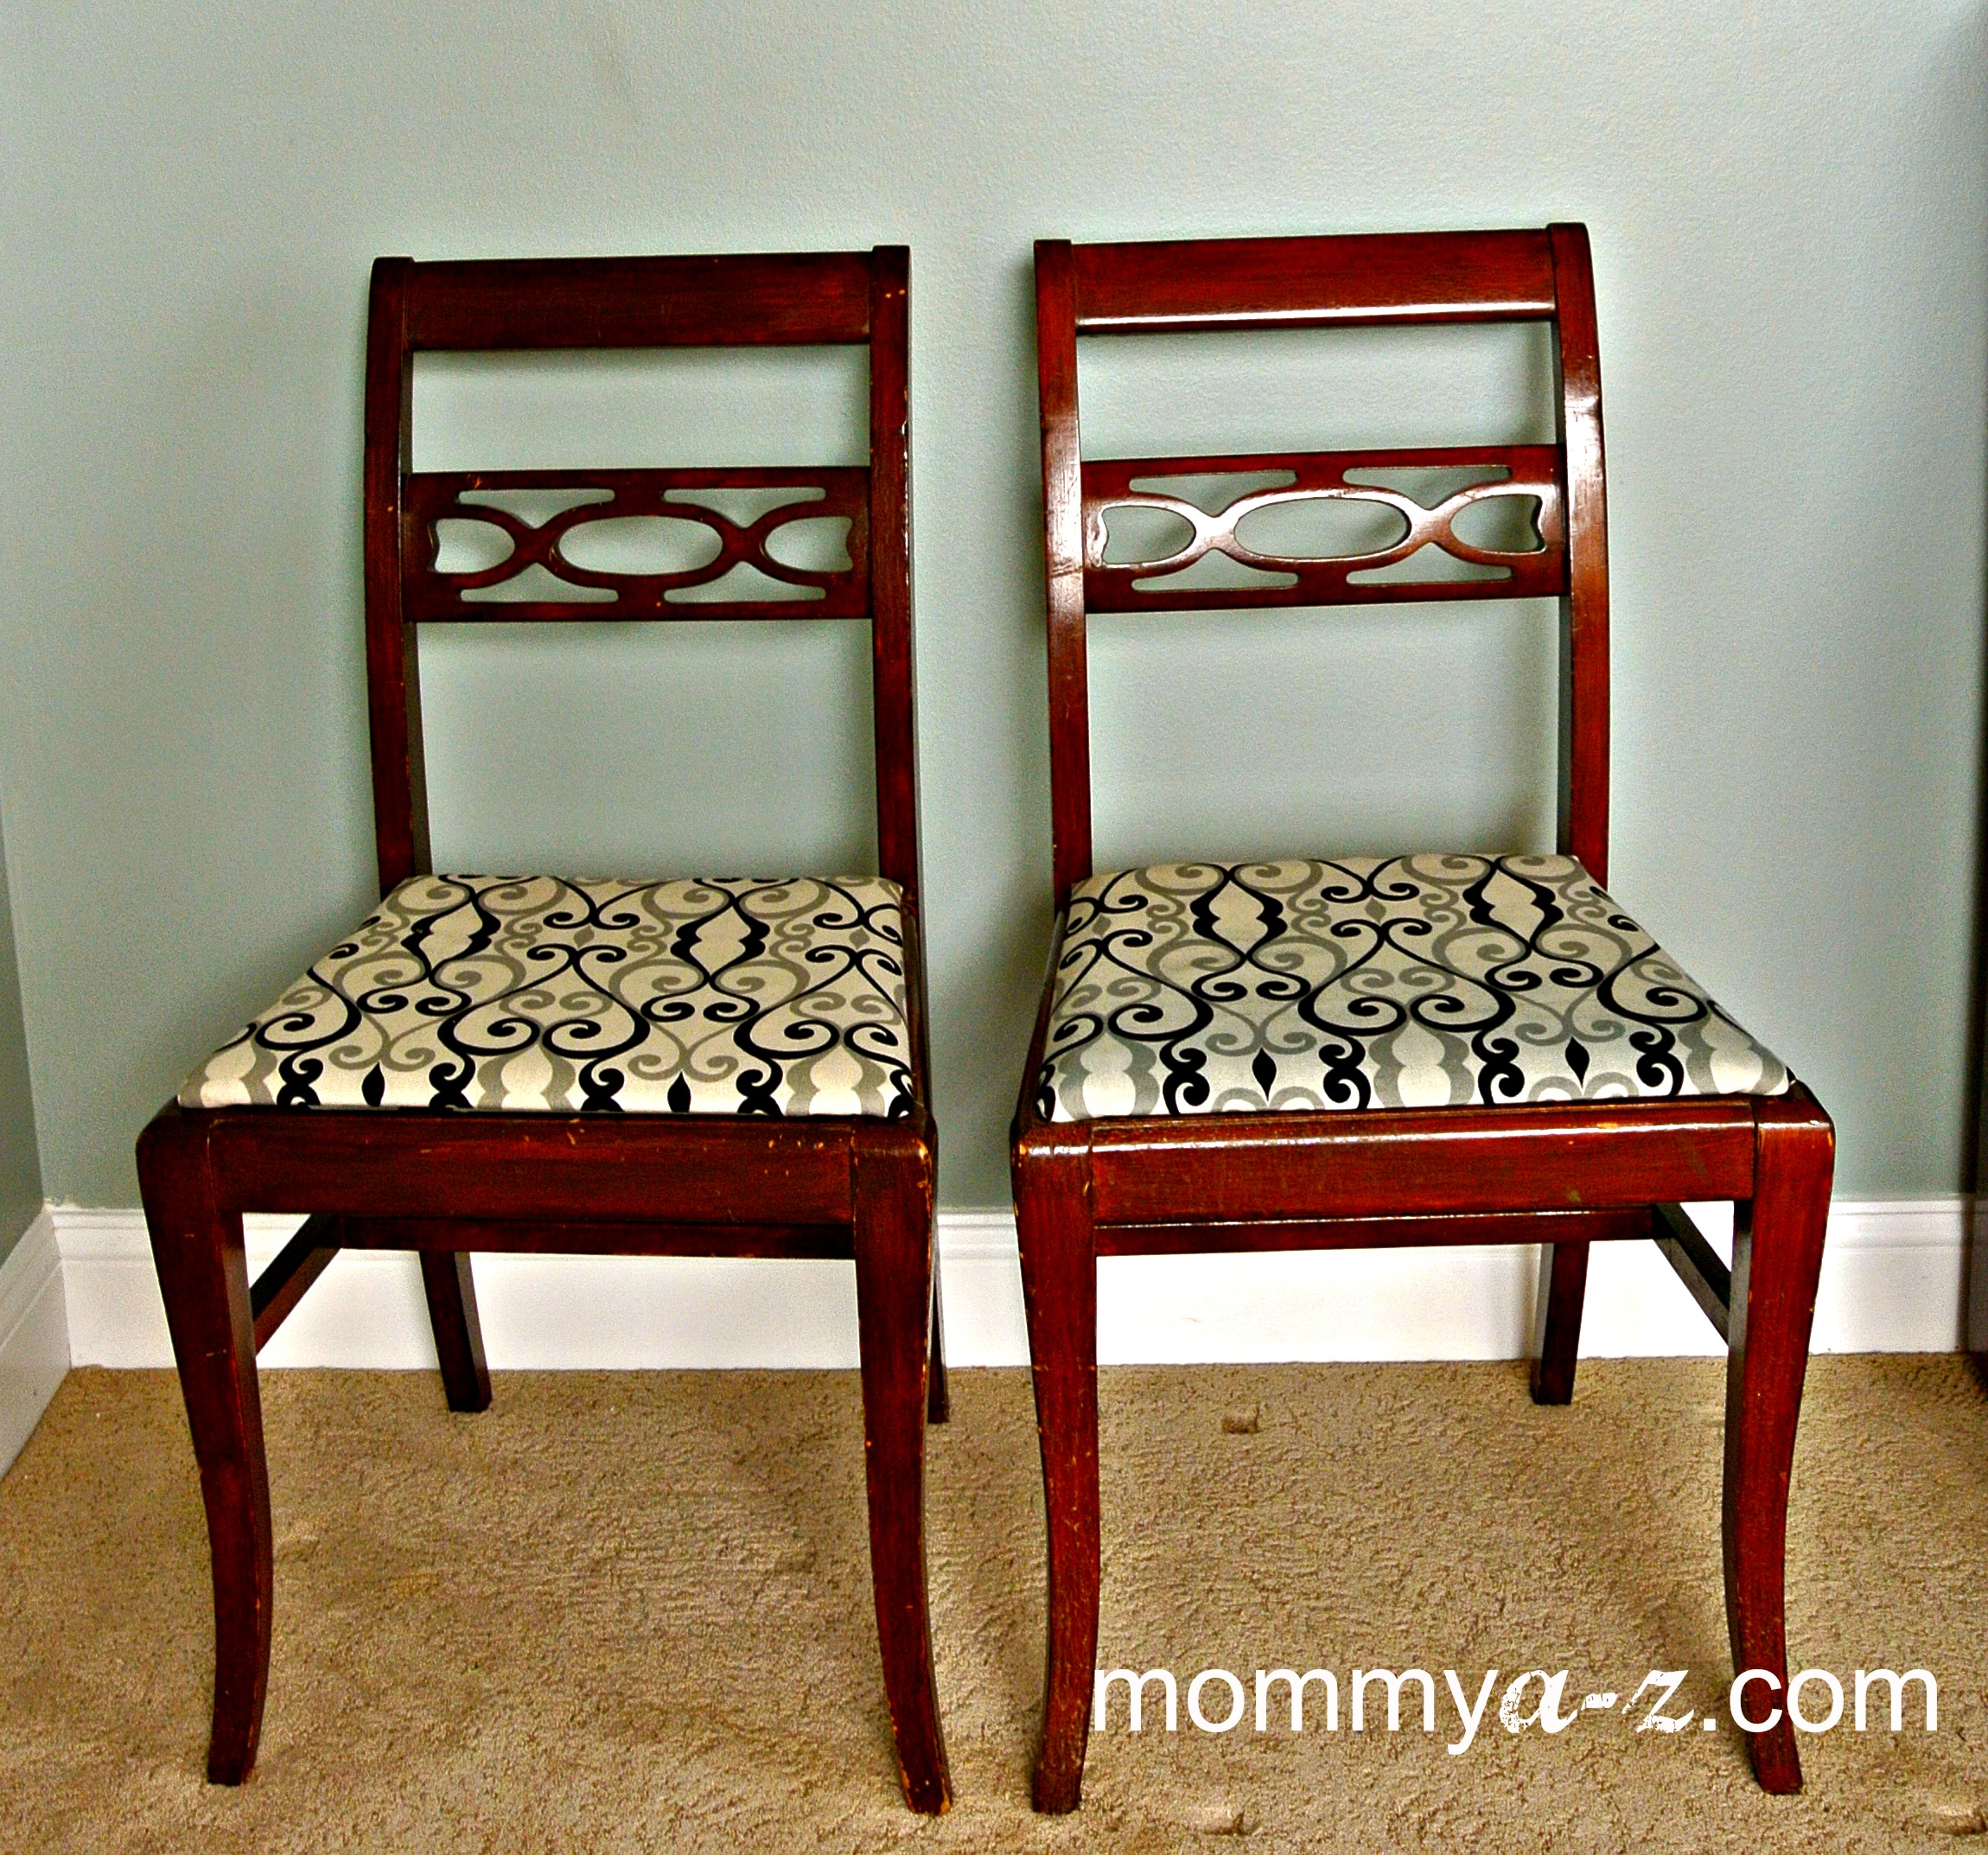 chairs_after | mommya-z.com